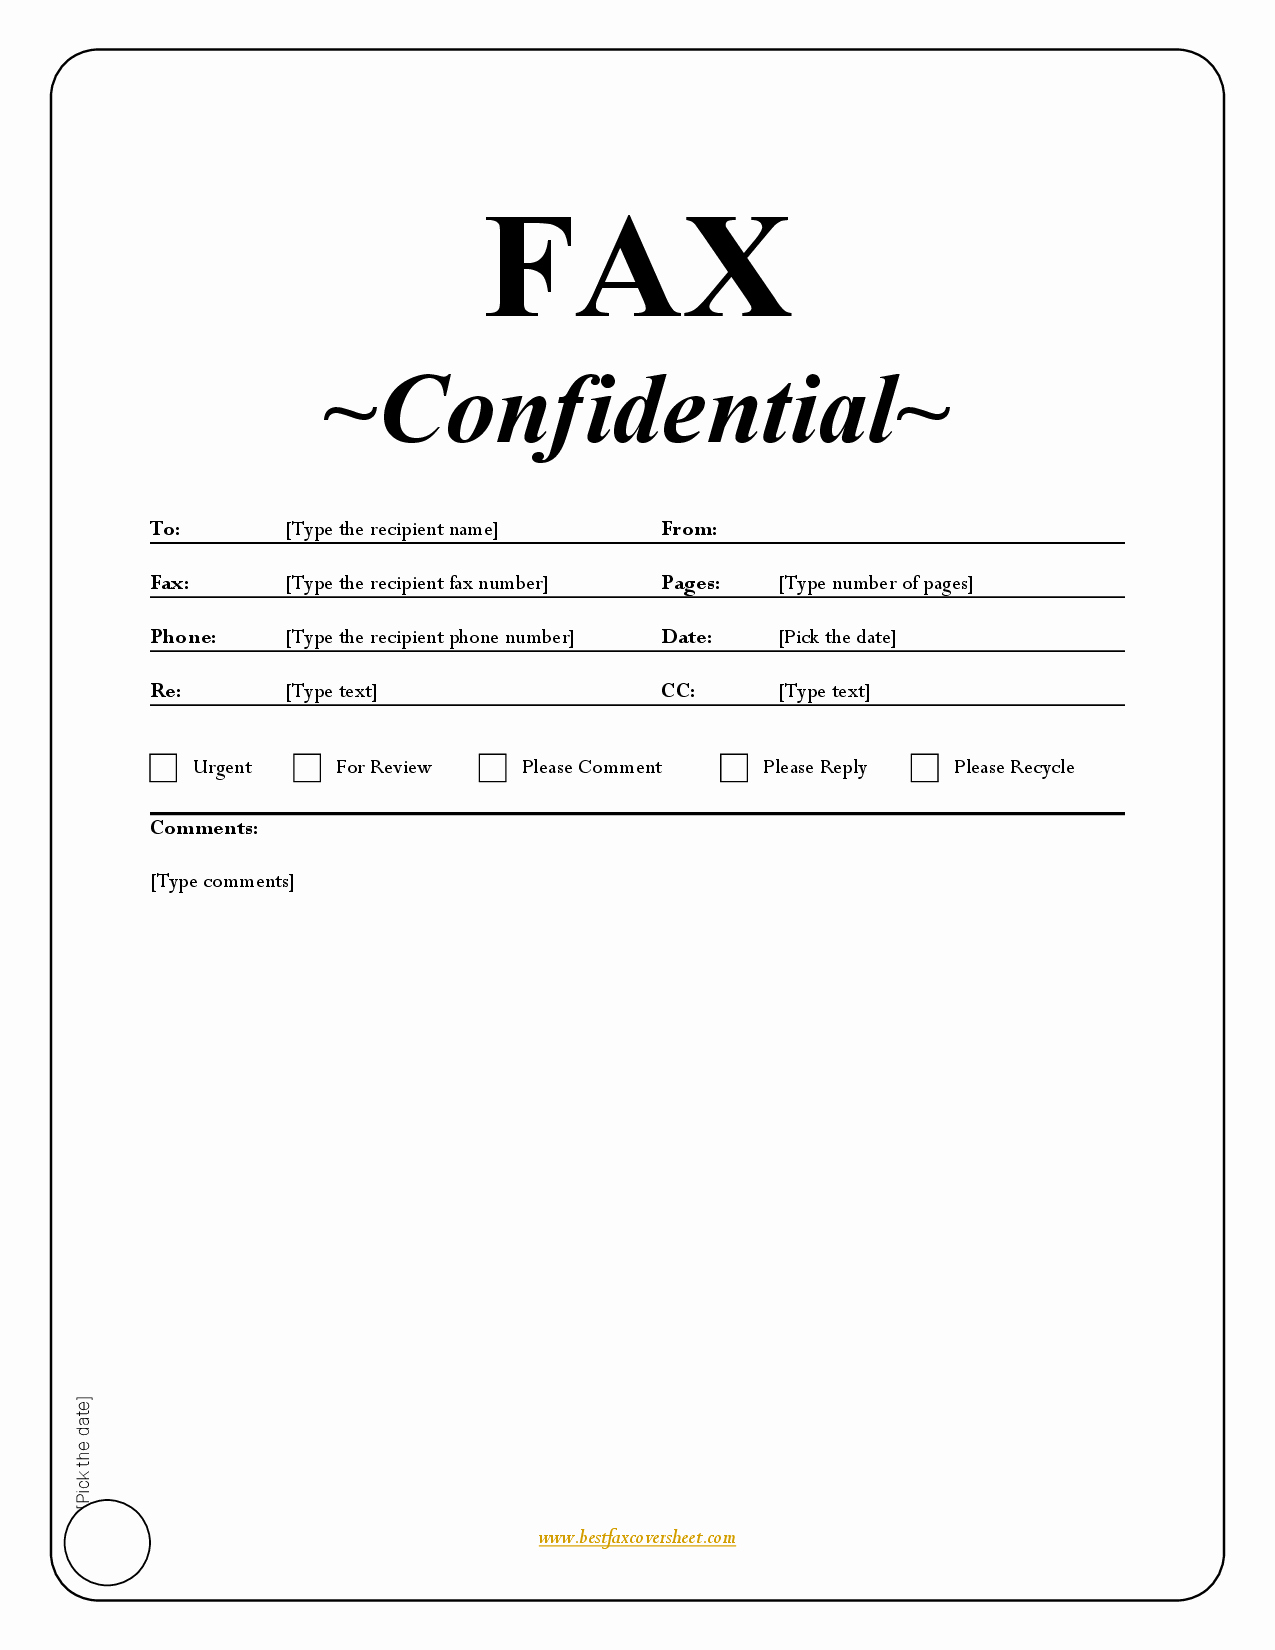 Free Fax Cover Sheet Templates Unique Printable Fax Cover Sheet with Confidentiality Statement